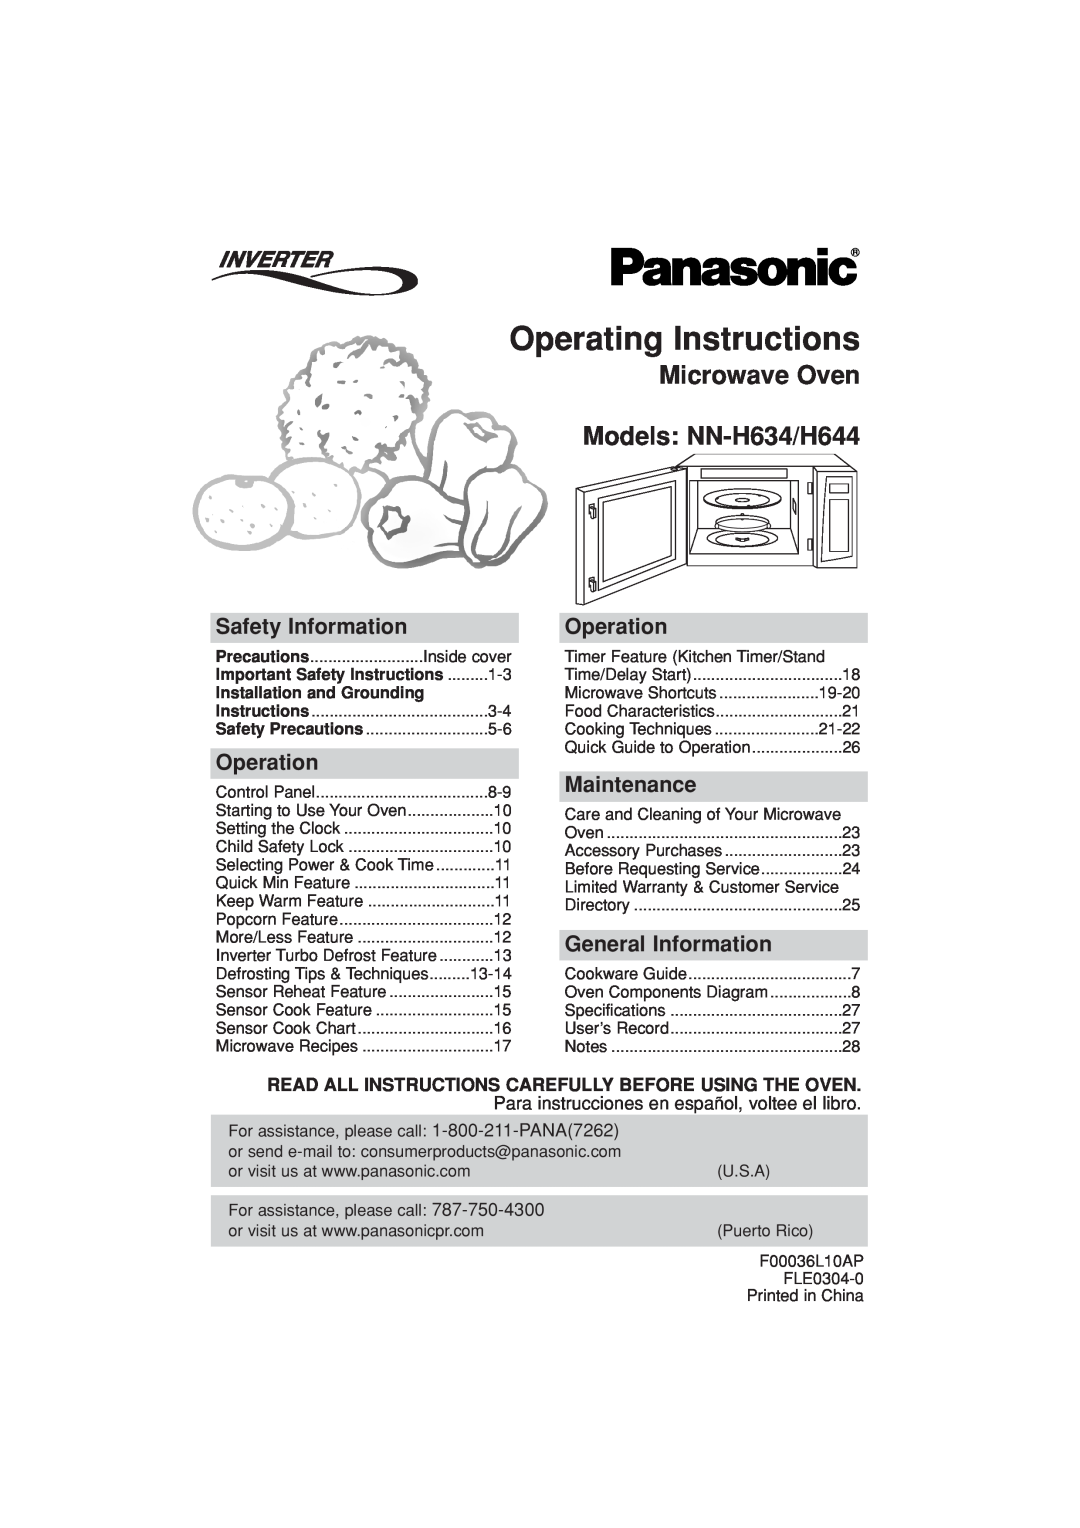 Panasonic important safety instructions Operating Instructions, Microwave Oven Models NN-H634/H644, Safety Information 